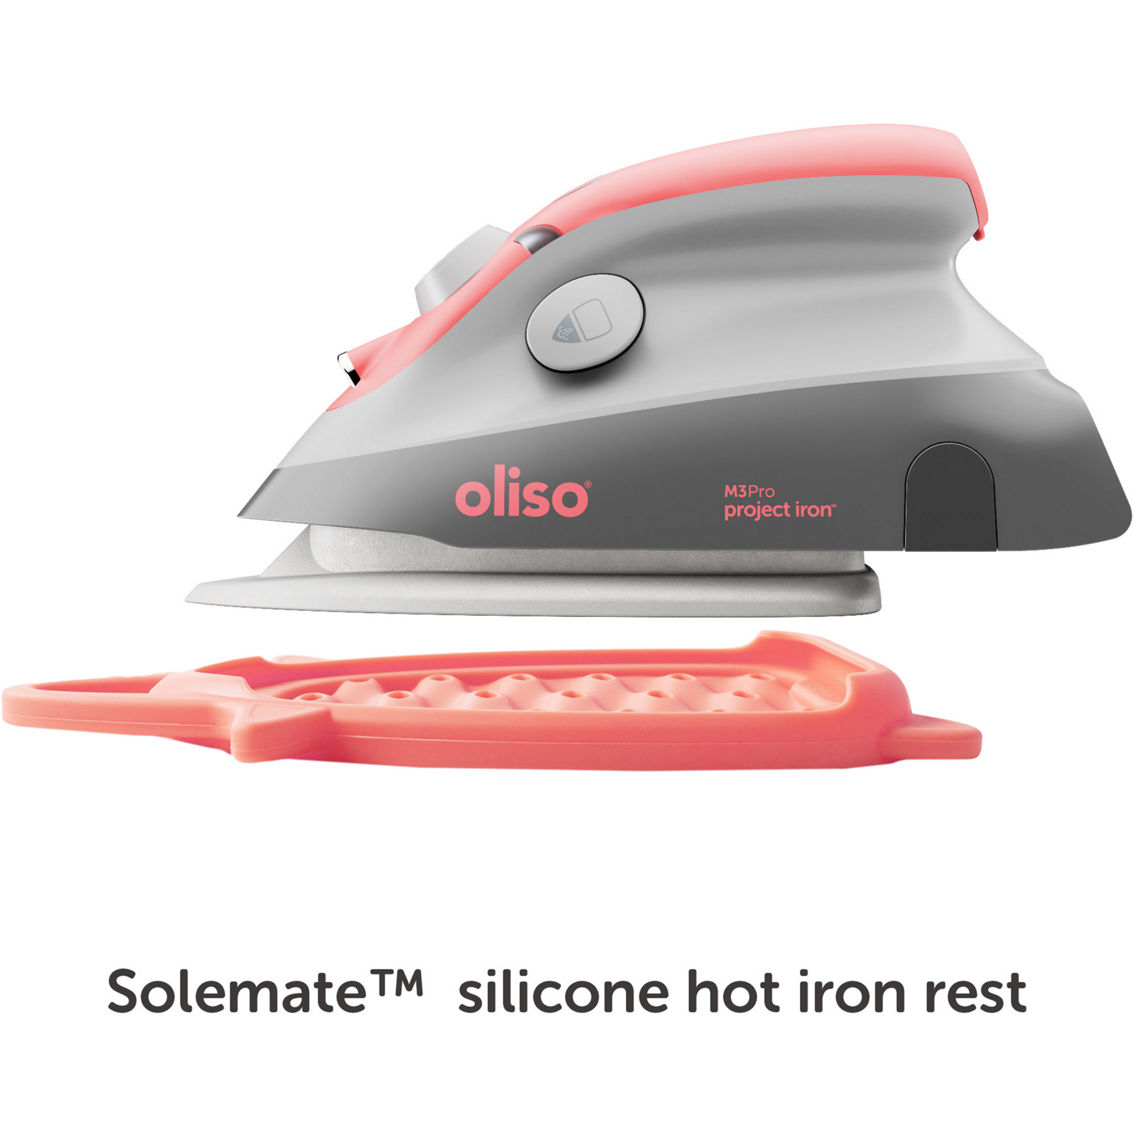 Oliso M3Pro Project Iron with Silicone Trivet - Image 7 of 10